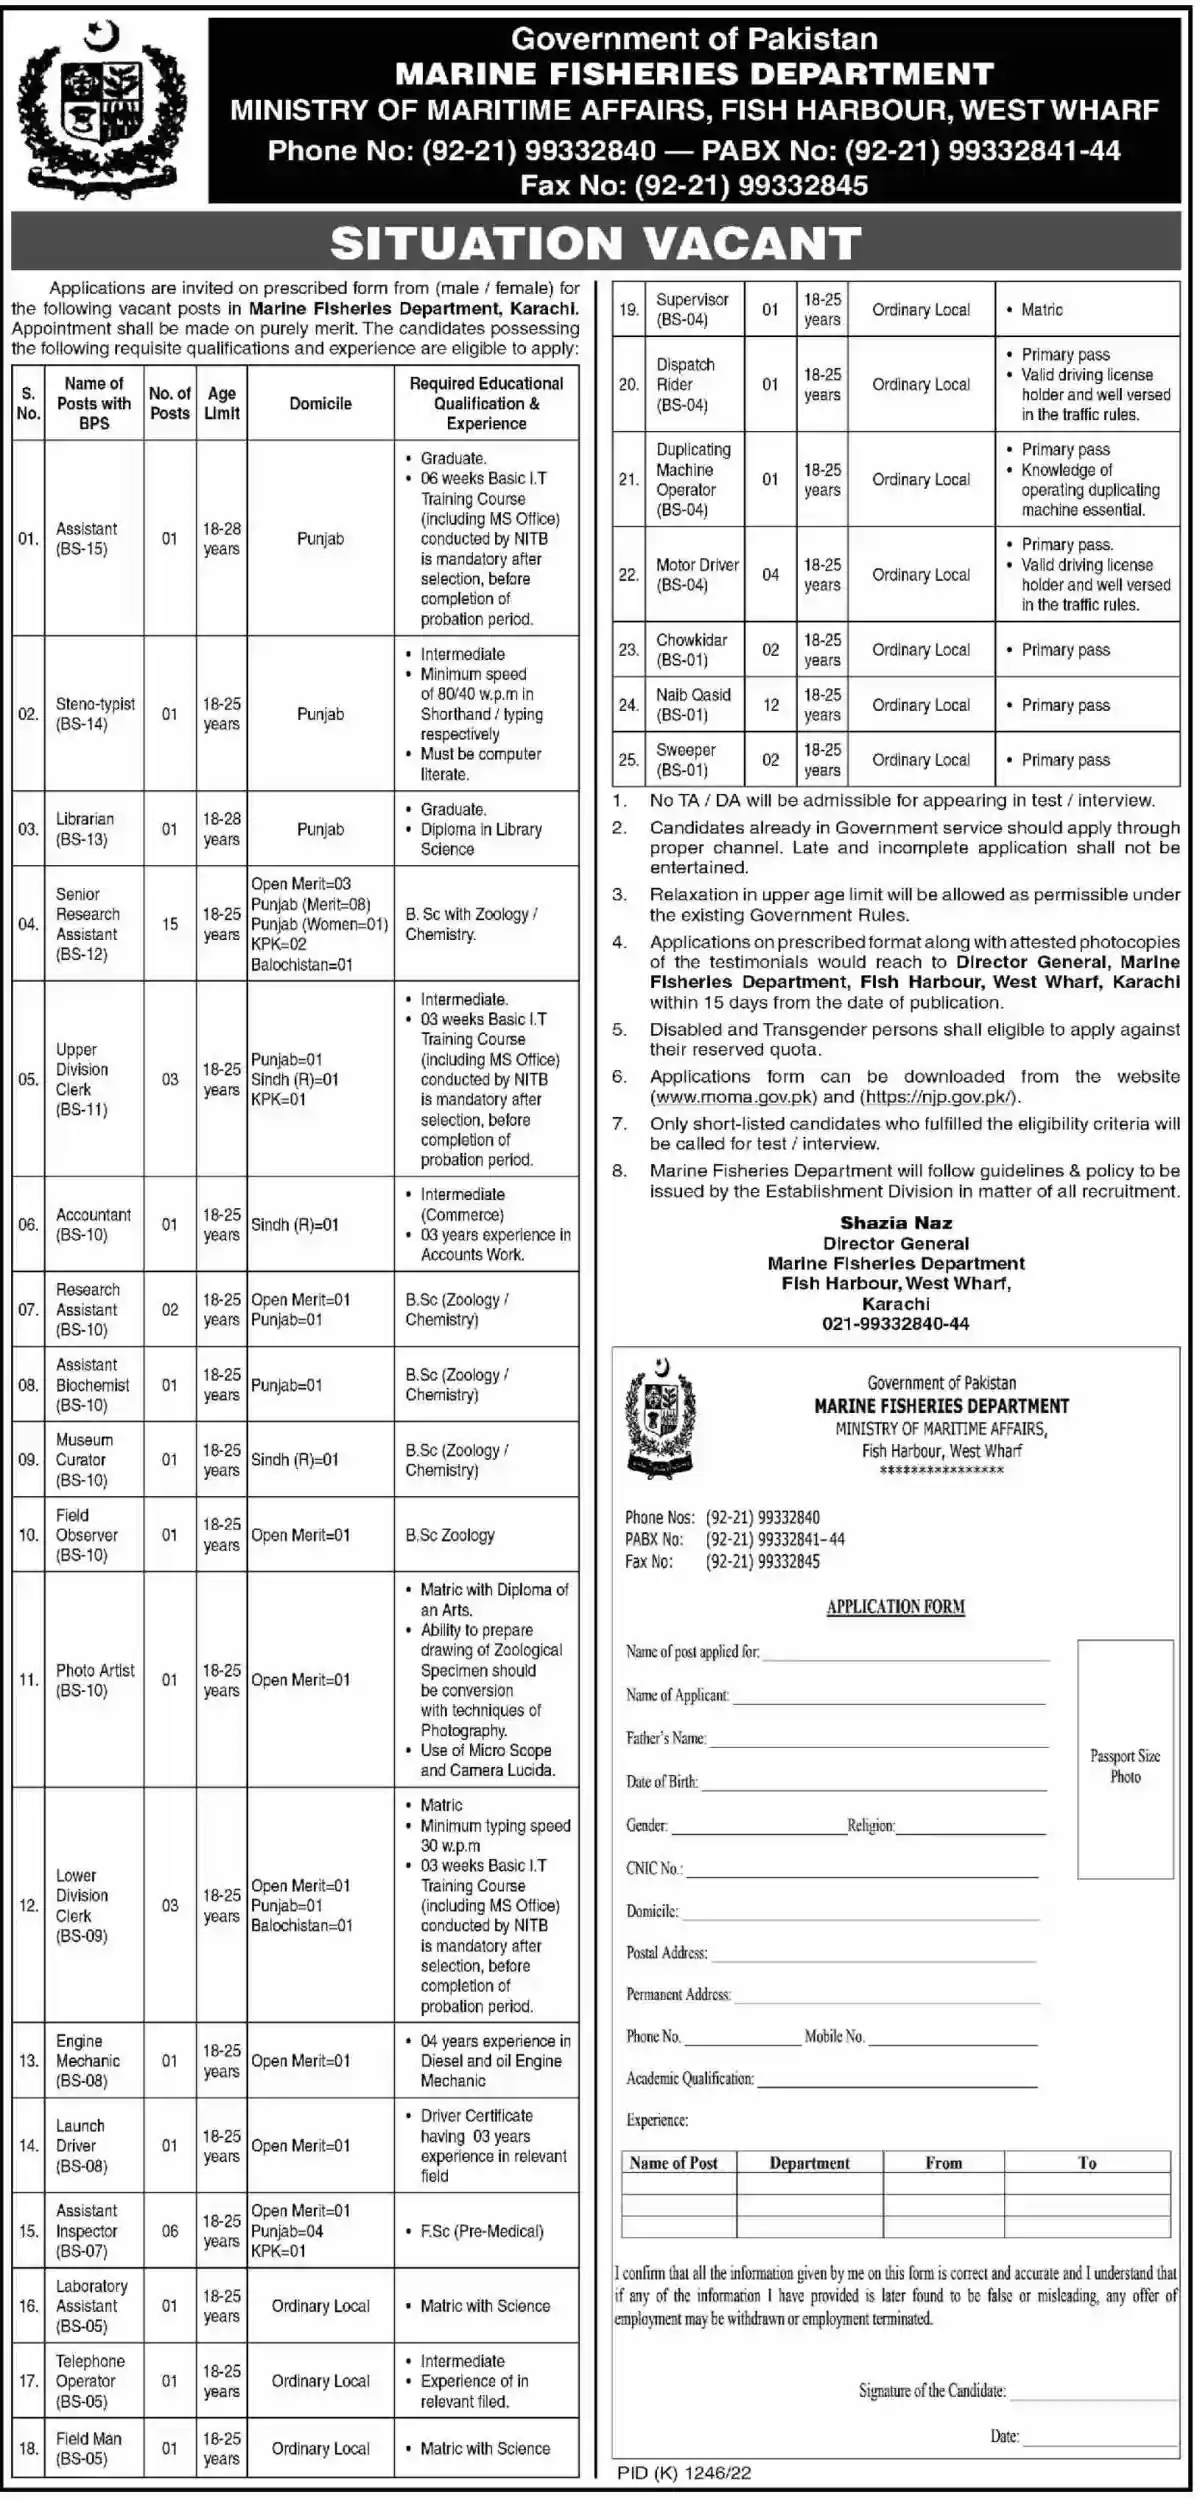 Name Of Posts Marine Fisheries Department Jobs 2022 Assistants Steno-typists Librarians Senior Research Assistants Upper Division Clerks UDC Accountants Research Assistants Assistant Biochemists Museum Curators Field Observers Photo Artists Lower Divison Clerks Engine Mechanics Drivers Assistant Inspectors Laboratory Assistants Telephone Operators Field Men Supervisors Dispatch Riders Duplicating Machine Operators Chowkidar Naib Qasid Sweepers Vacant Posts name: Sr. No Post Name Qualification No of Seats 1. Assistants Graduate 01 2. Stenotypist Intermediate 01 3. Librarian Graduate 01 4. Senior Research Assistant BSc 15 5. UDC Intermediate 03 6. Accountant Intermediate 01 7. Research Assistant BSc 02 8. Assistant Biochemist BSc 01 9. Museum Curator BSc 01 10. Field Observer BSc 01 11. Photo Artist Matric 01 12. LDC Matric 03 13. Engine mechanic Experienced 01 14. Launch Driver Valid Driving license 01 15. Assistant Inspector FSc 06 16. Laboratory Assistant Matric 01 17. Telephone Operator FSc 01 18. Fieldman Matric 01 19. Supervisor Matric 01 20. Dispatch Rider Primary 01 21. Duplicating Machine Operator Primary 01 22. Motor driver Primary 04 23. Chowkidar Primary 02 24. Naib Qasid Primary 12 25. Sweeper Primary 02 How To Apply for Marine Fisheries Department Jobs 2022